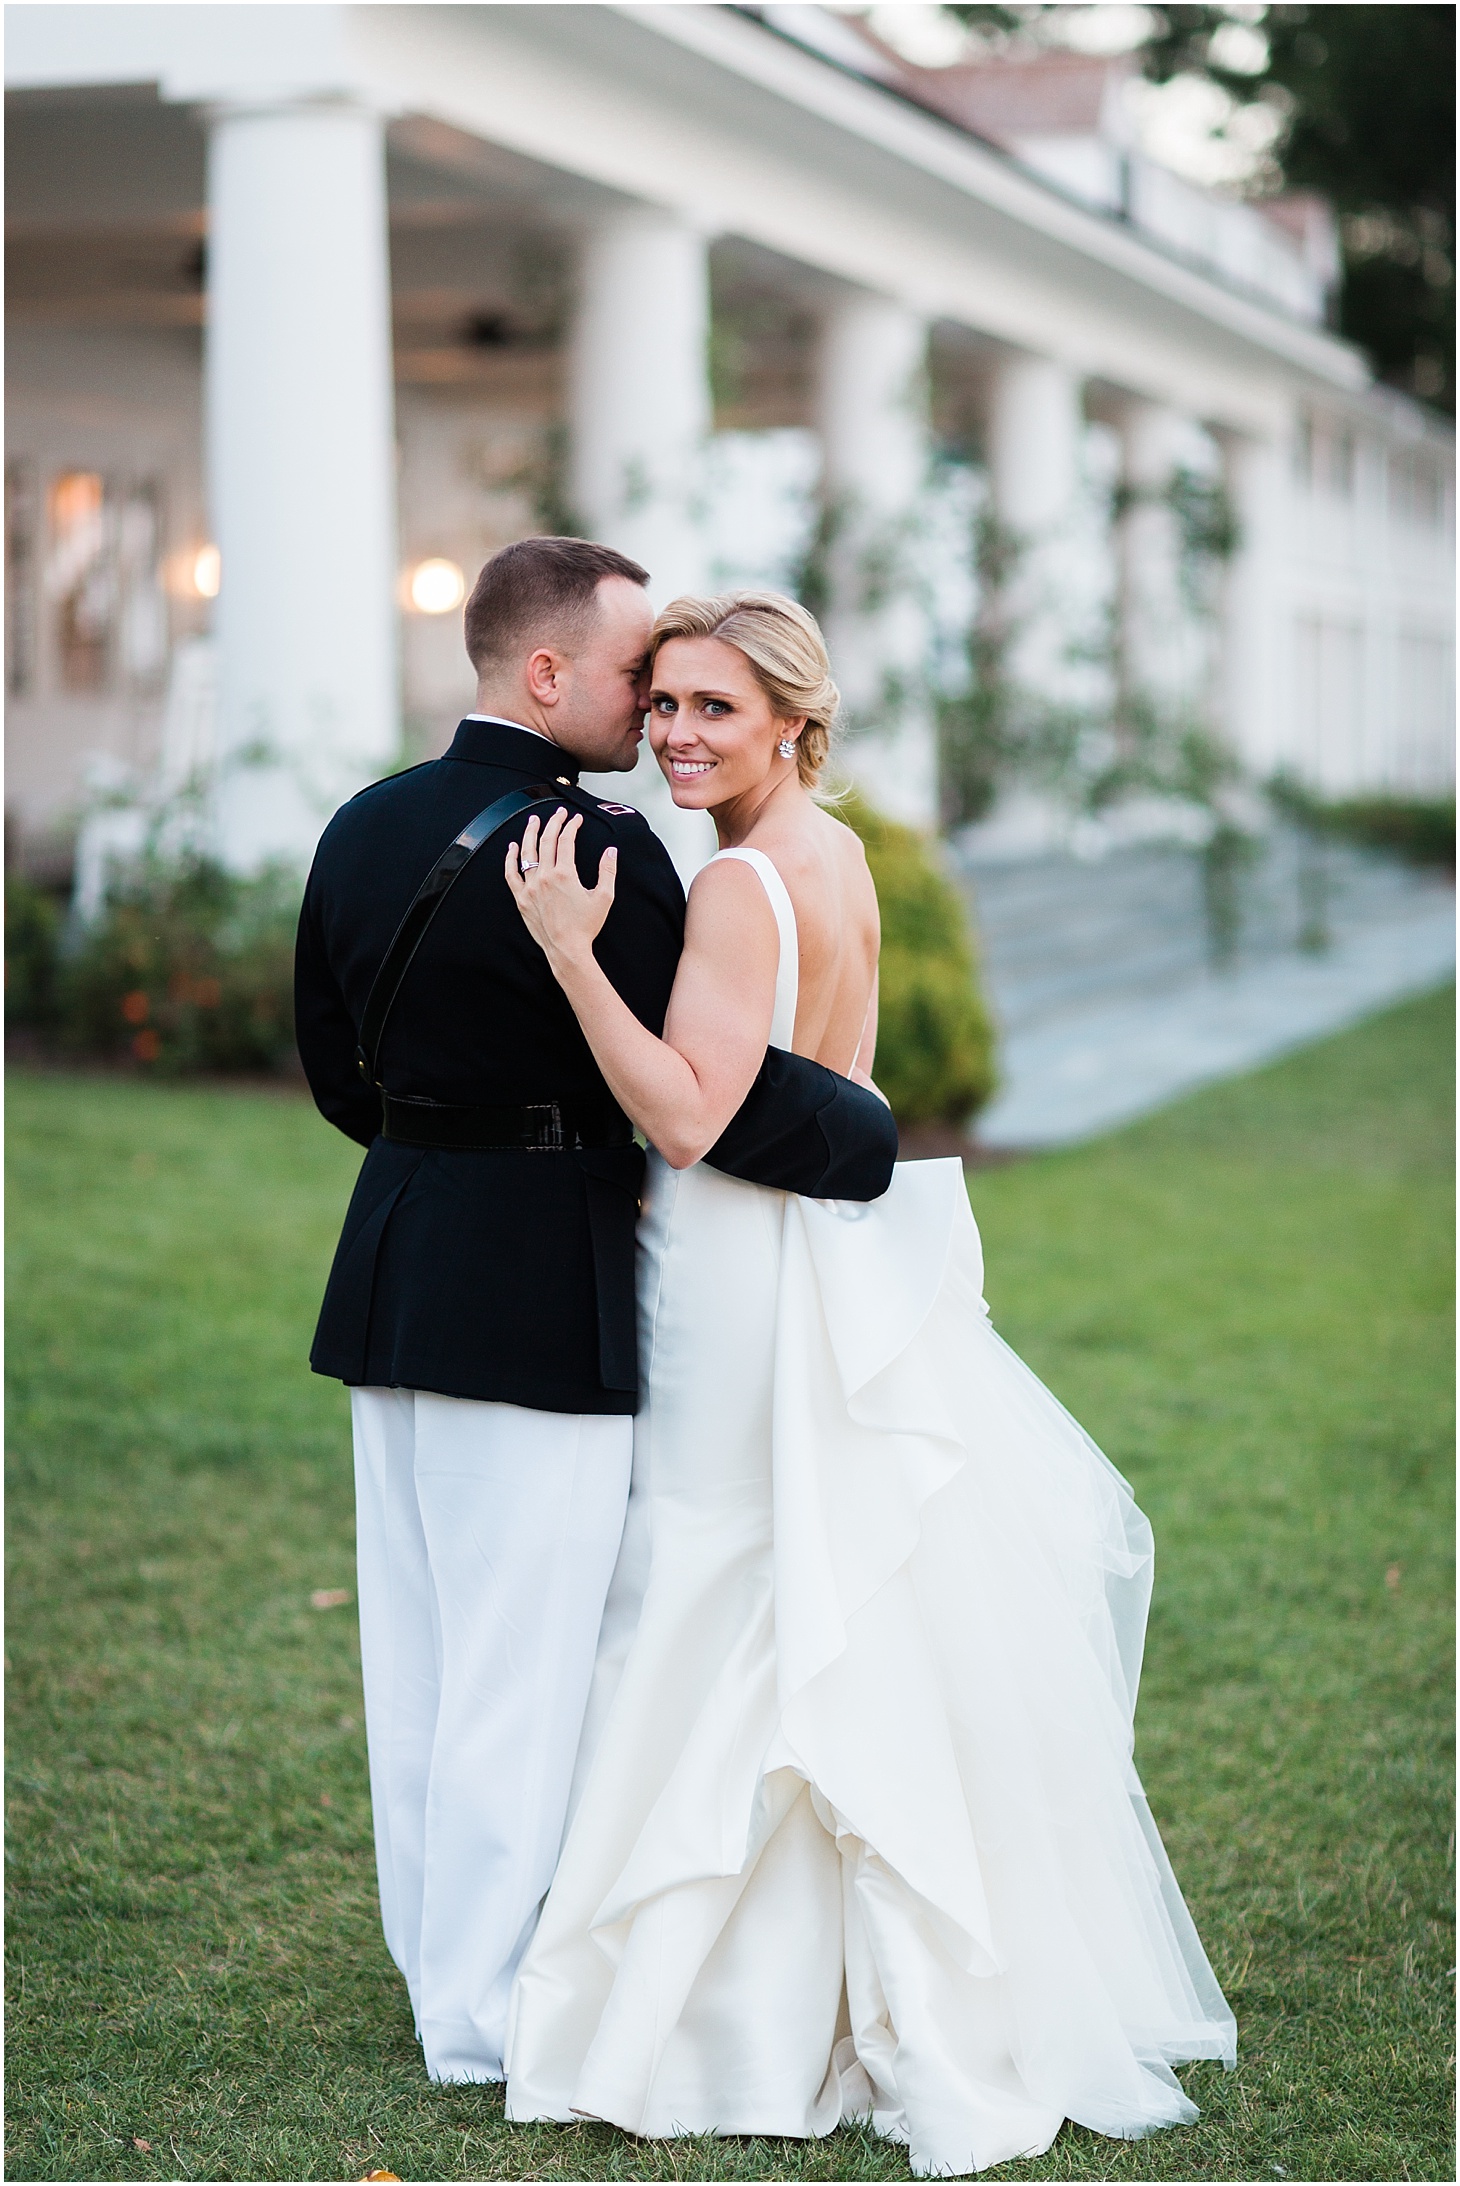 Wedding Portraits at Gibson Island Club in Annapolis, MD | Southern Magnolia Wedding at the Naval Academy and Gibson Island Club | Sarah Bradshaw Photography